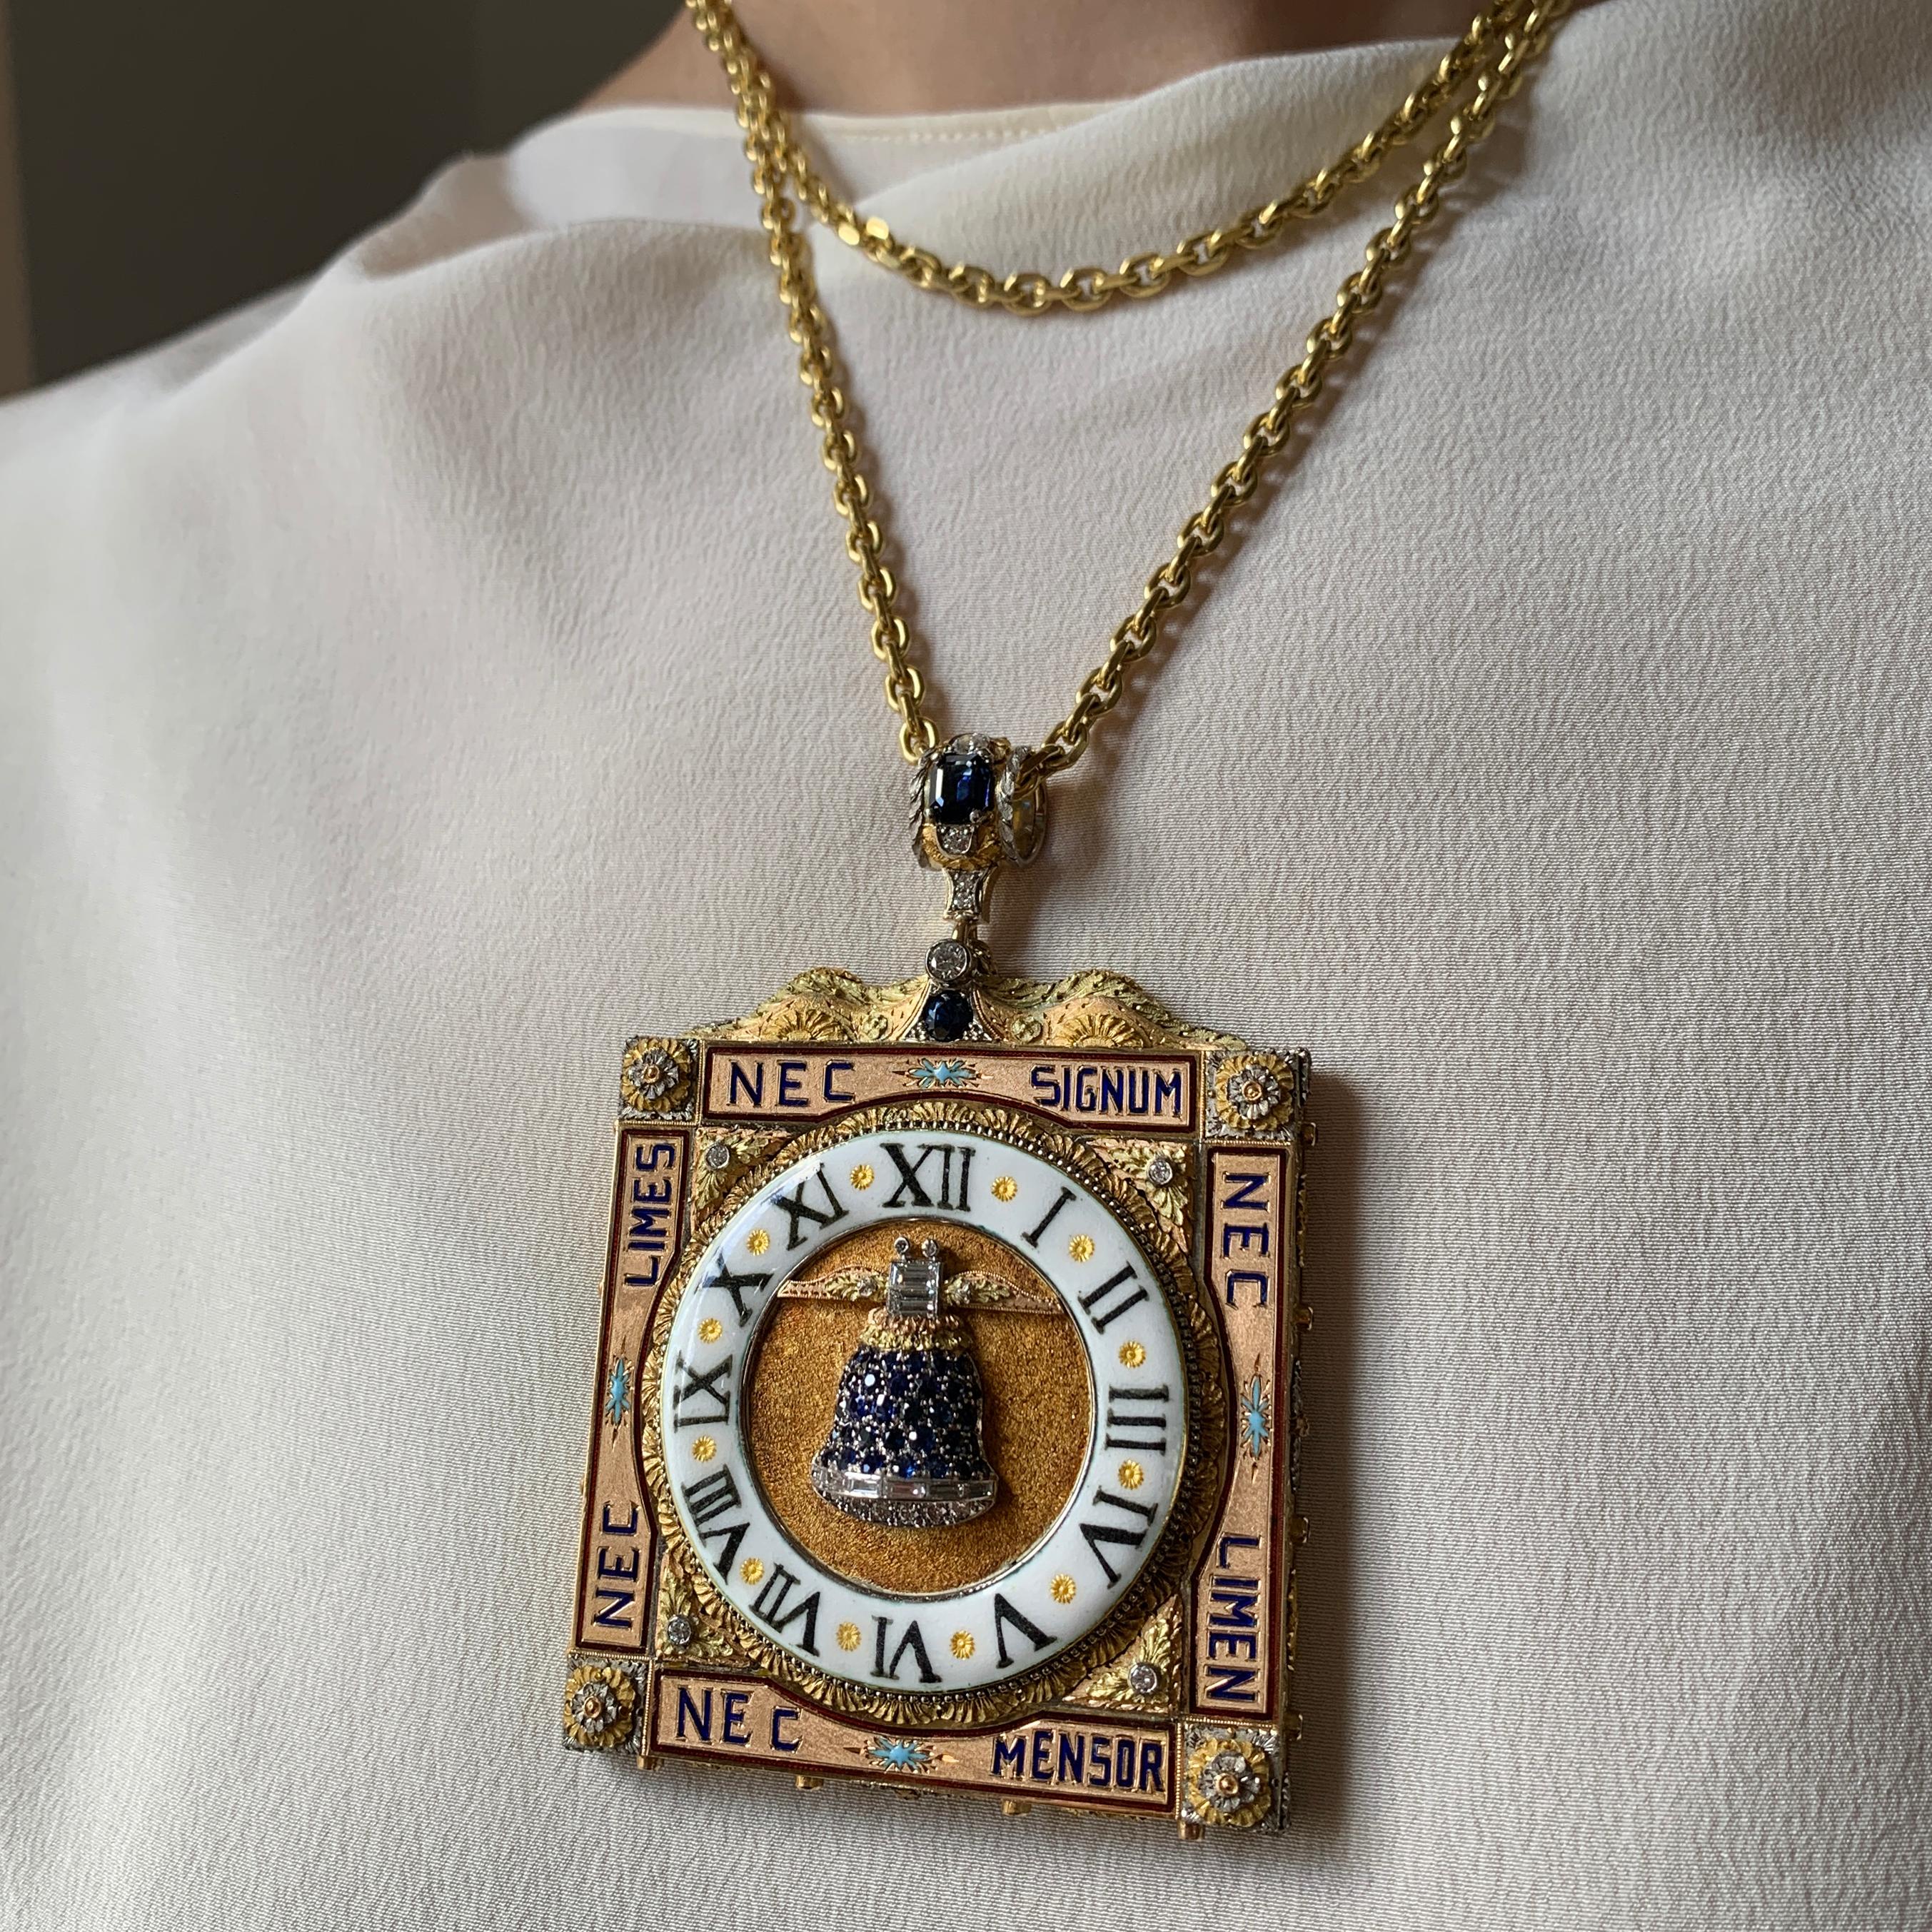 A diamond, sapphire, enamel, and 18 karat white, yellow, and rose gold clock pendant, by the house of Cazzaniga, c. 1970, Italy. Signed Cazzaniga Roma 750, Italian Hallmarks. A hand made work of exceptional manufacture, impressive scale and